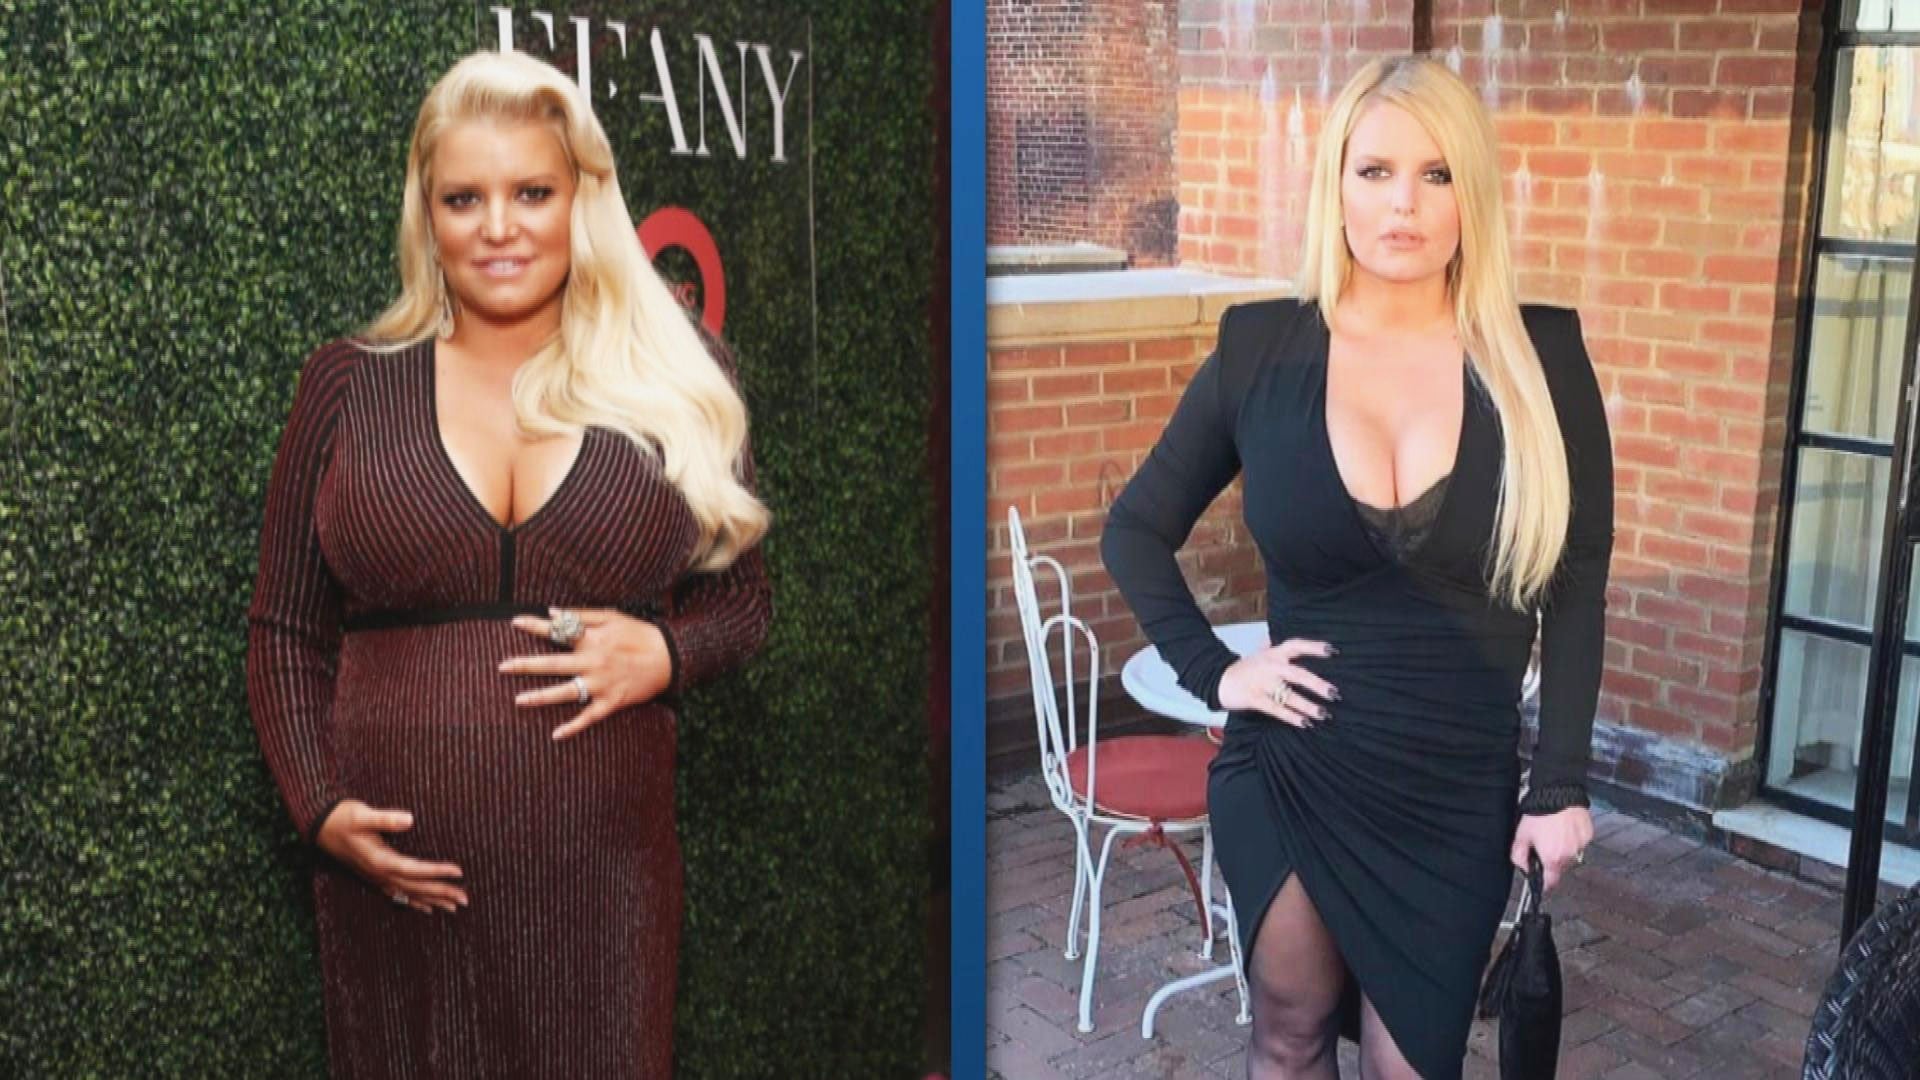 Jessica Simpson celebrates losing 100 pounds since giving birth